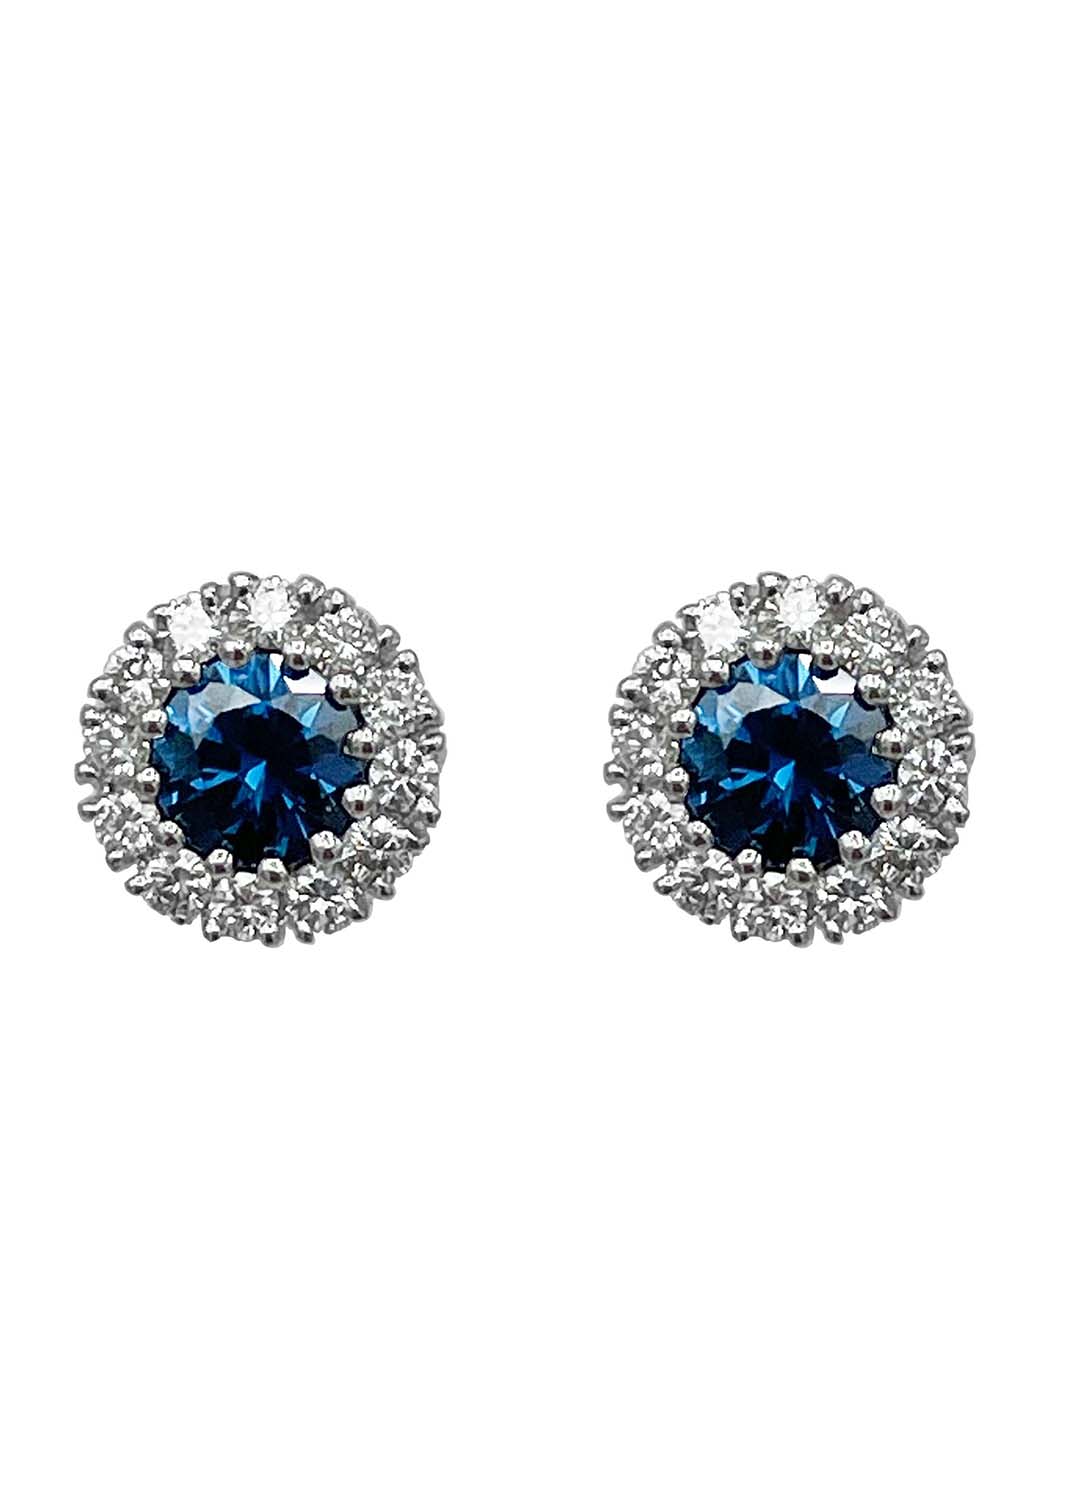 18k White Gold Stud Earrings with Sapphire and Diamonds Image